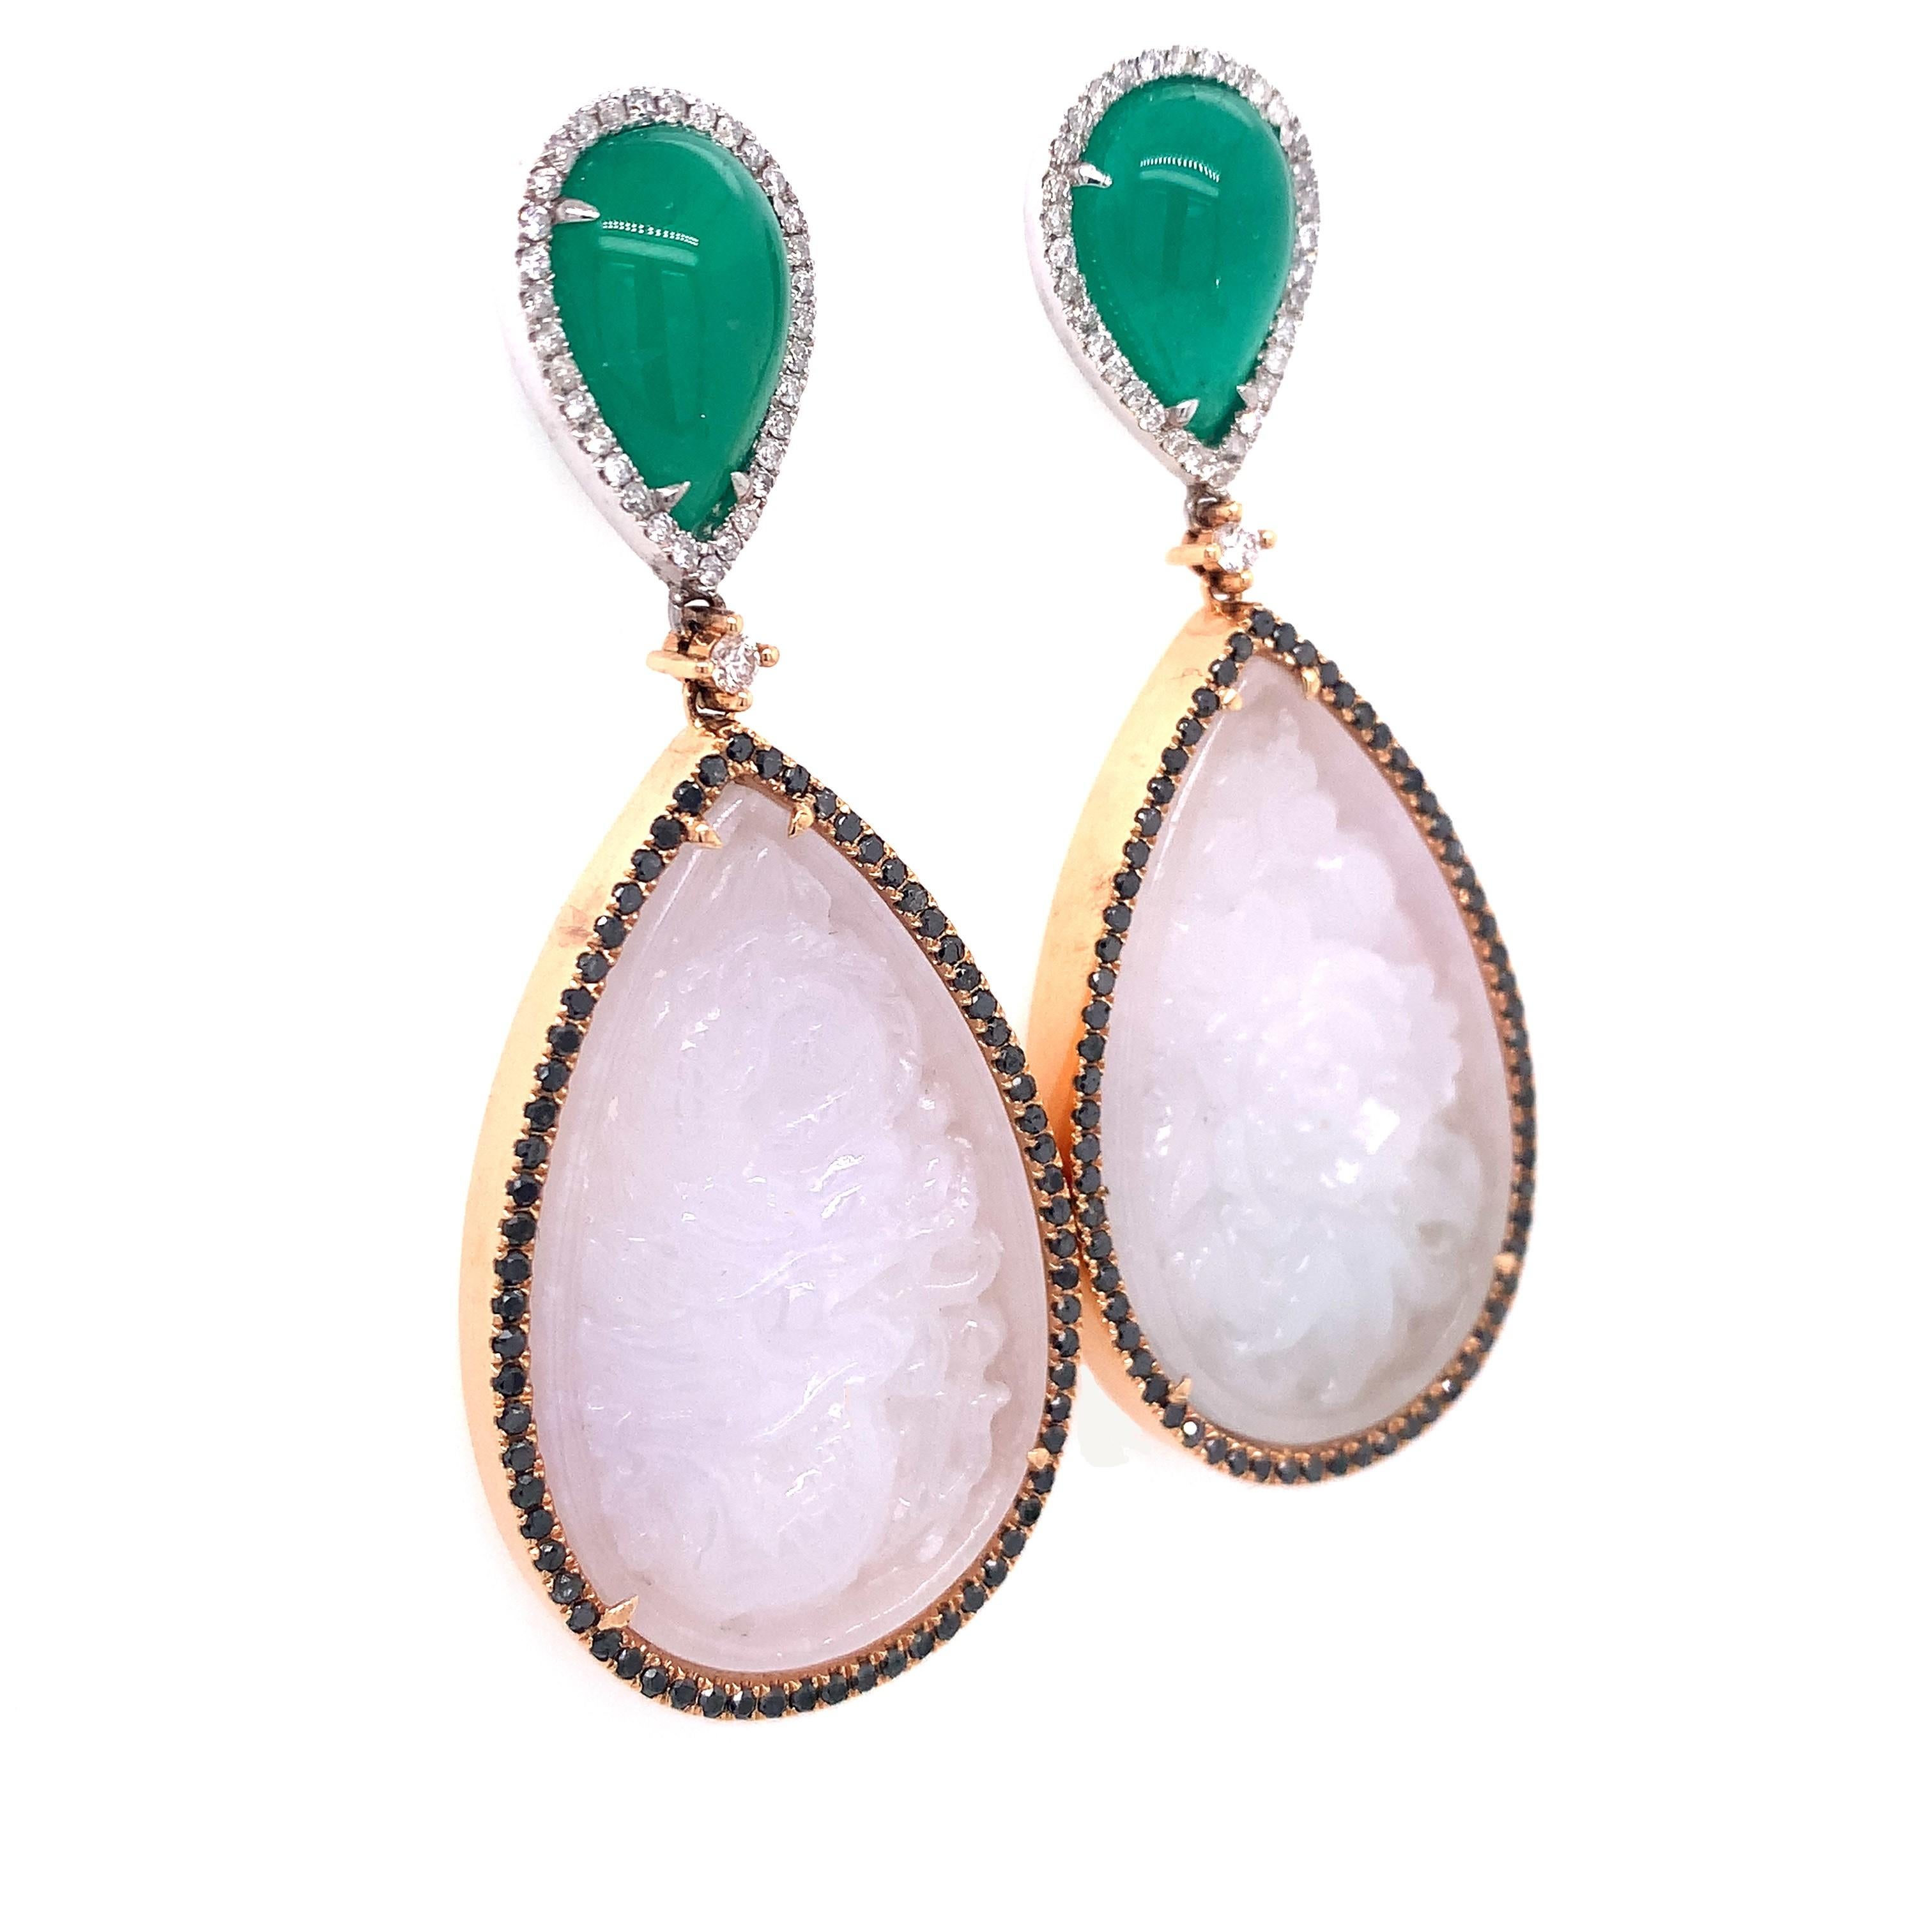 Exclusive collection,

Intricately hand carved pure colored Jade earrings with diamonds and cabochon Emerald  on top set in 18K two tone gold.

Jade: 73.04 ct total weight.
Emerald: 13.00 ct total weight.
Diamond: 0.62 ct total weight.
All diamonds